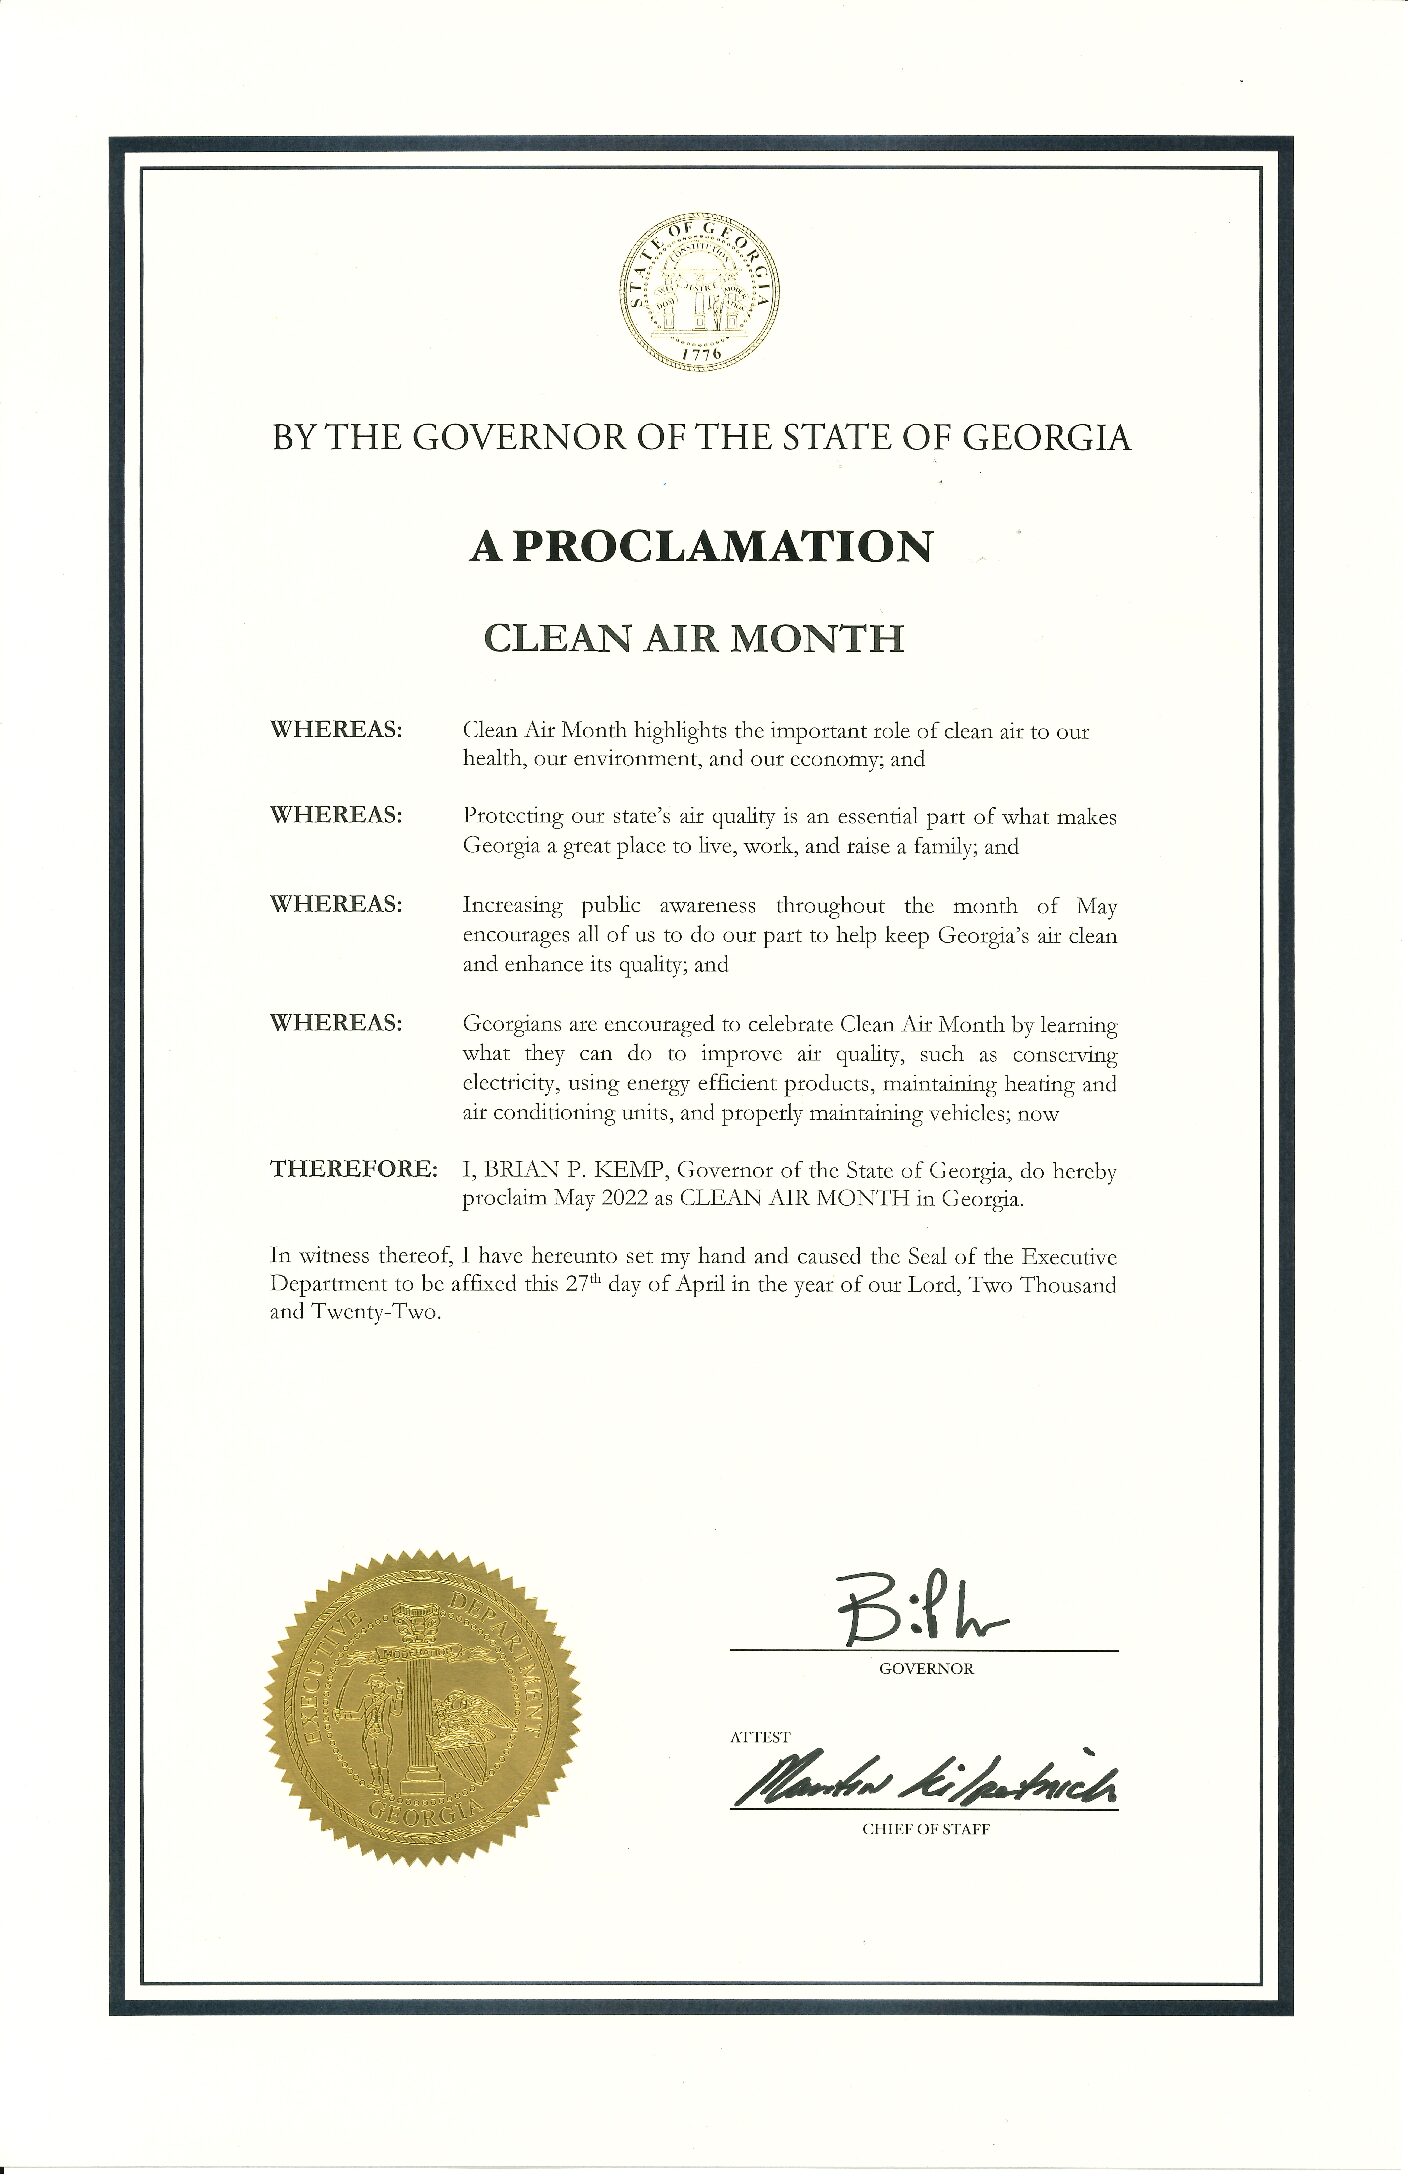 It’s Official!  May is Clean Air Month!